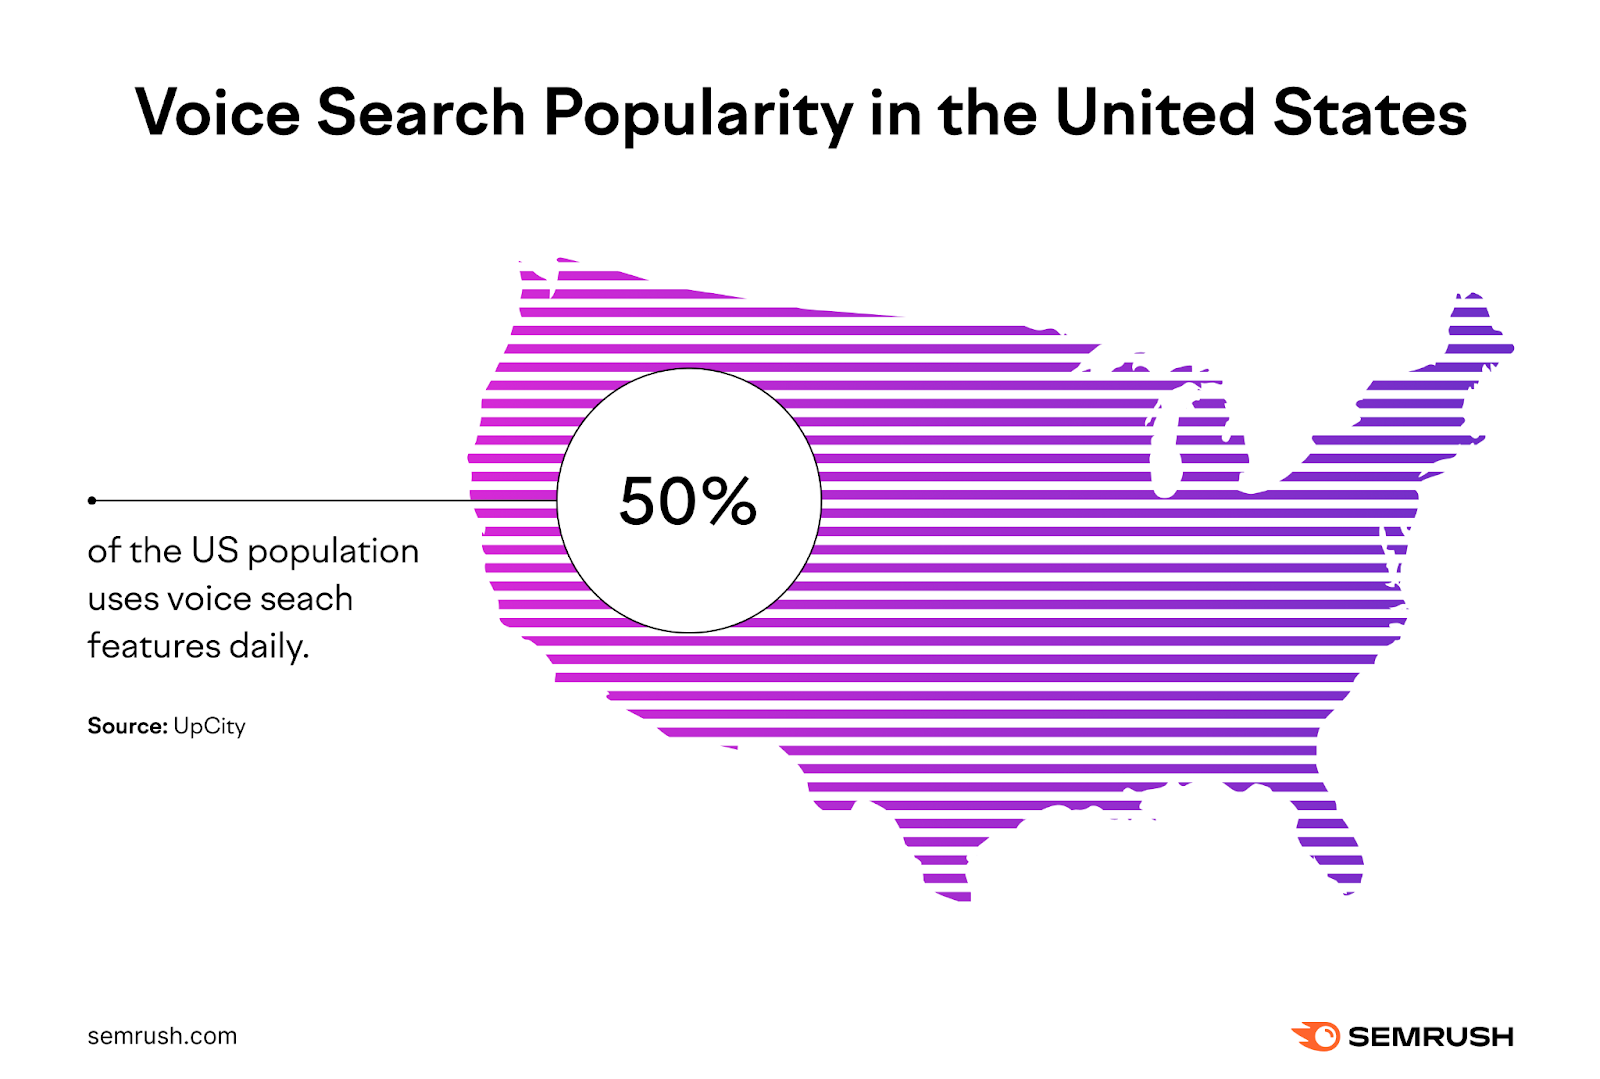 Voice search popularity in the United States